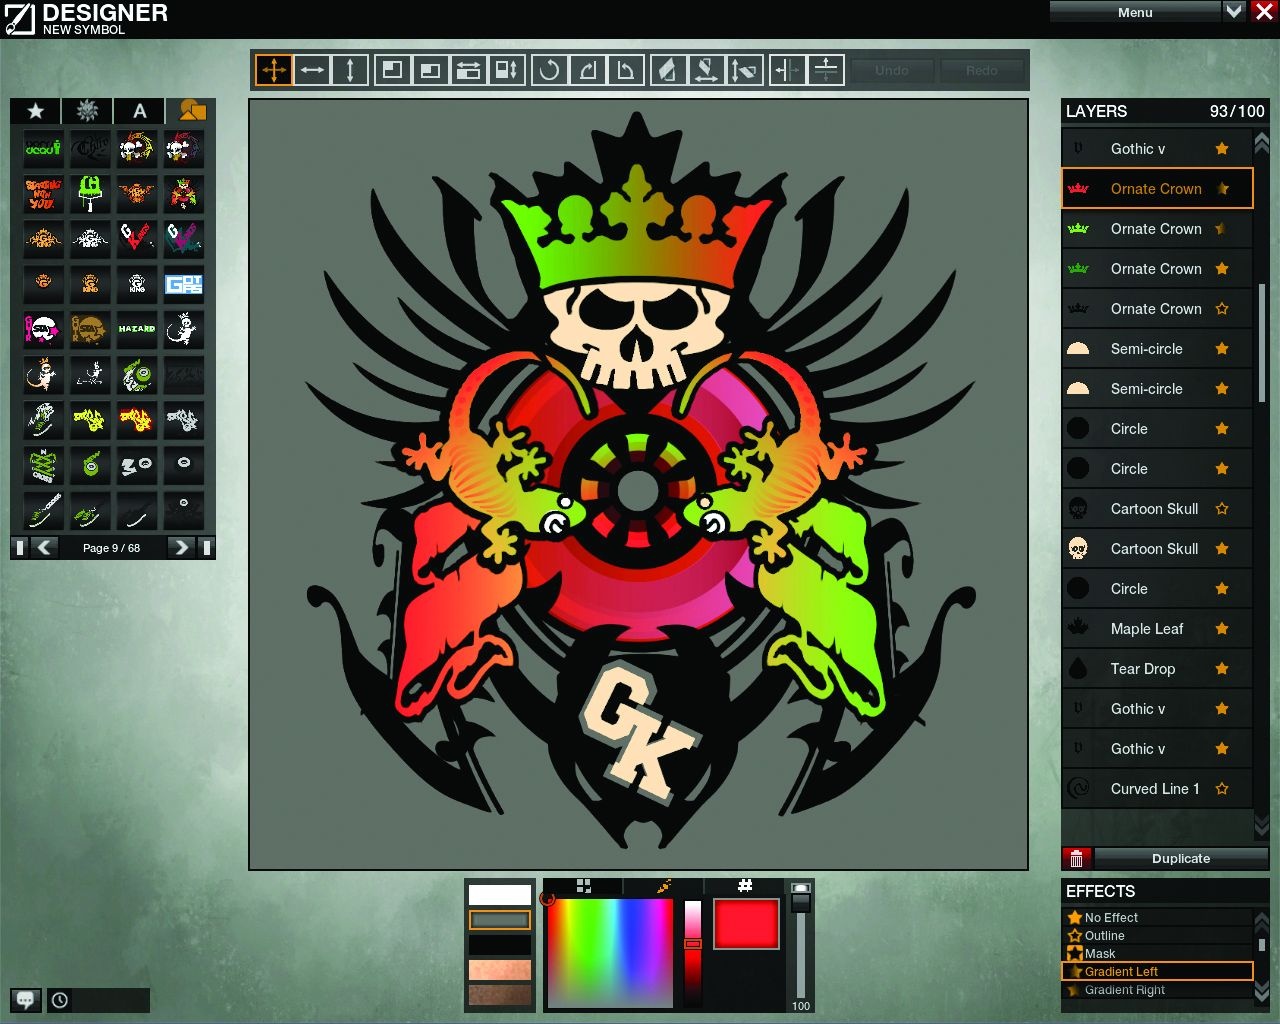 An extensive image editor allows you to create custom decals for your gang.